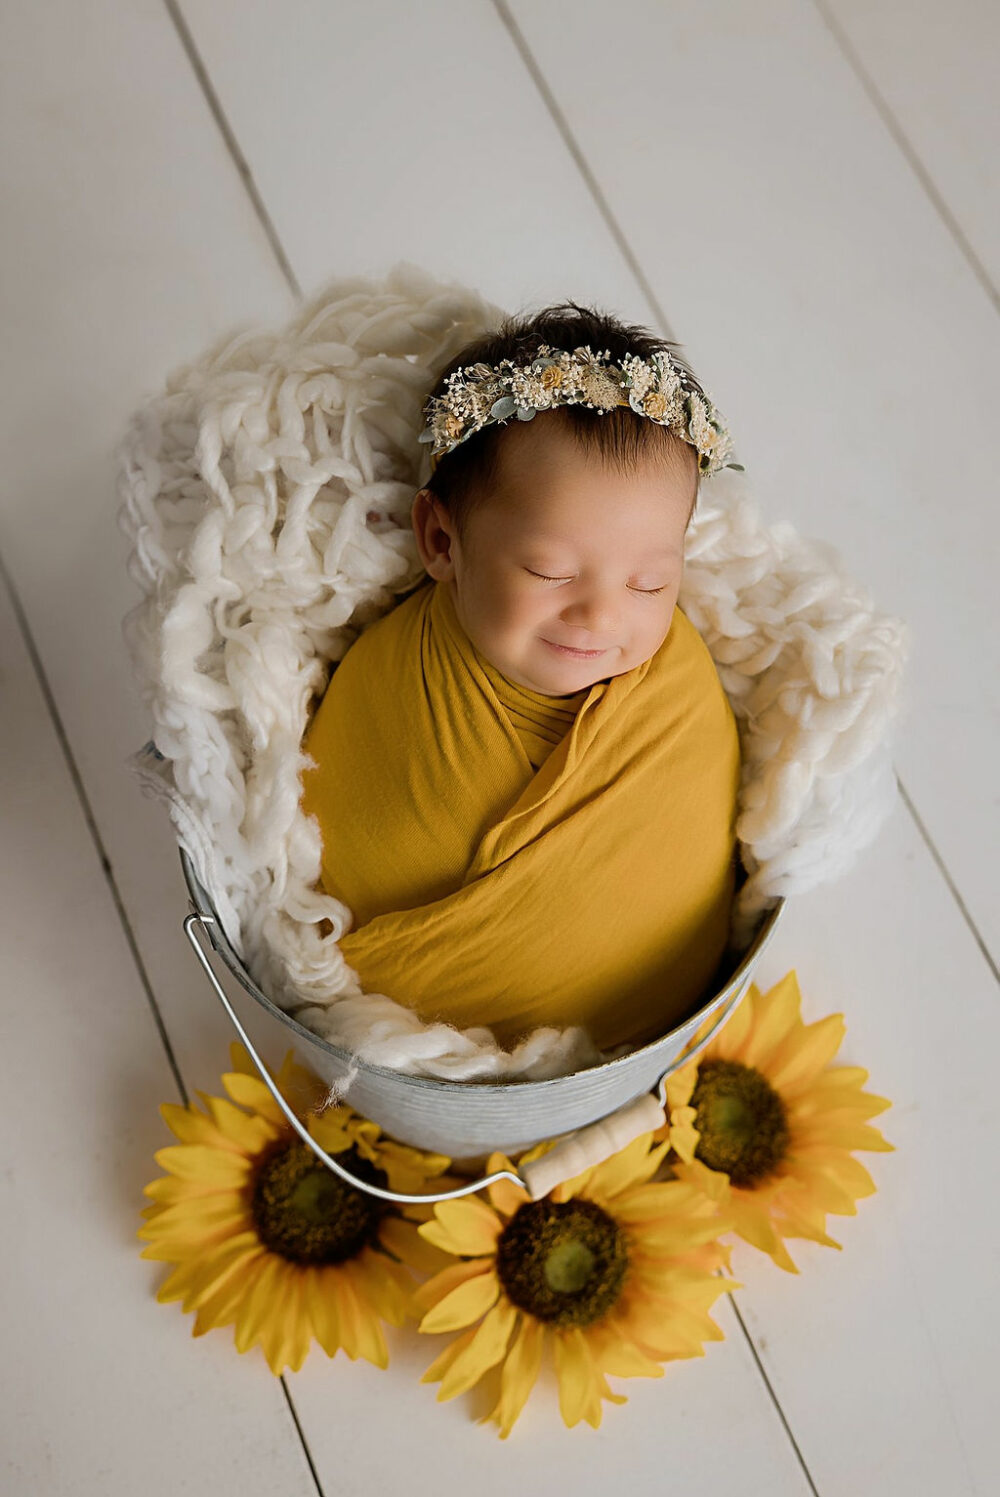 Newborn portrait of girls, sleeping in bucket, photography prop with sunflowers for her yellow In-studio newborn session in Princeton, New Jersey.